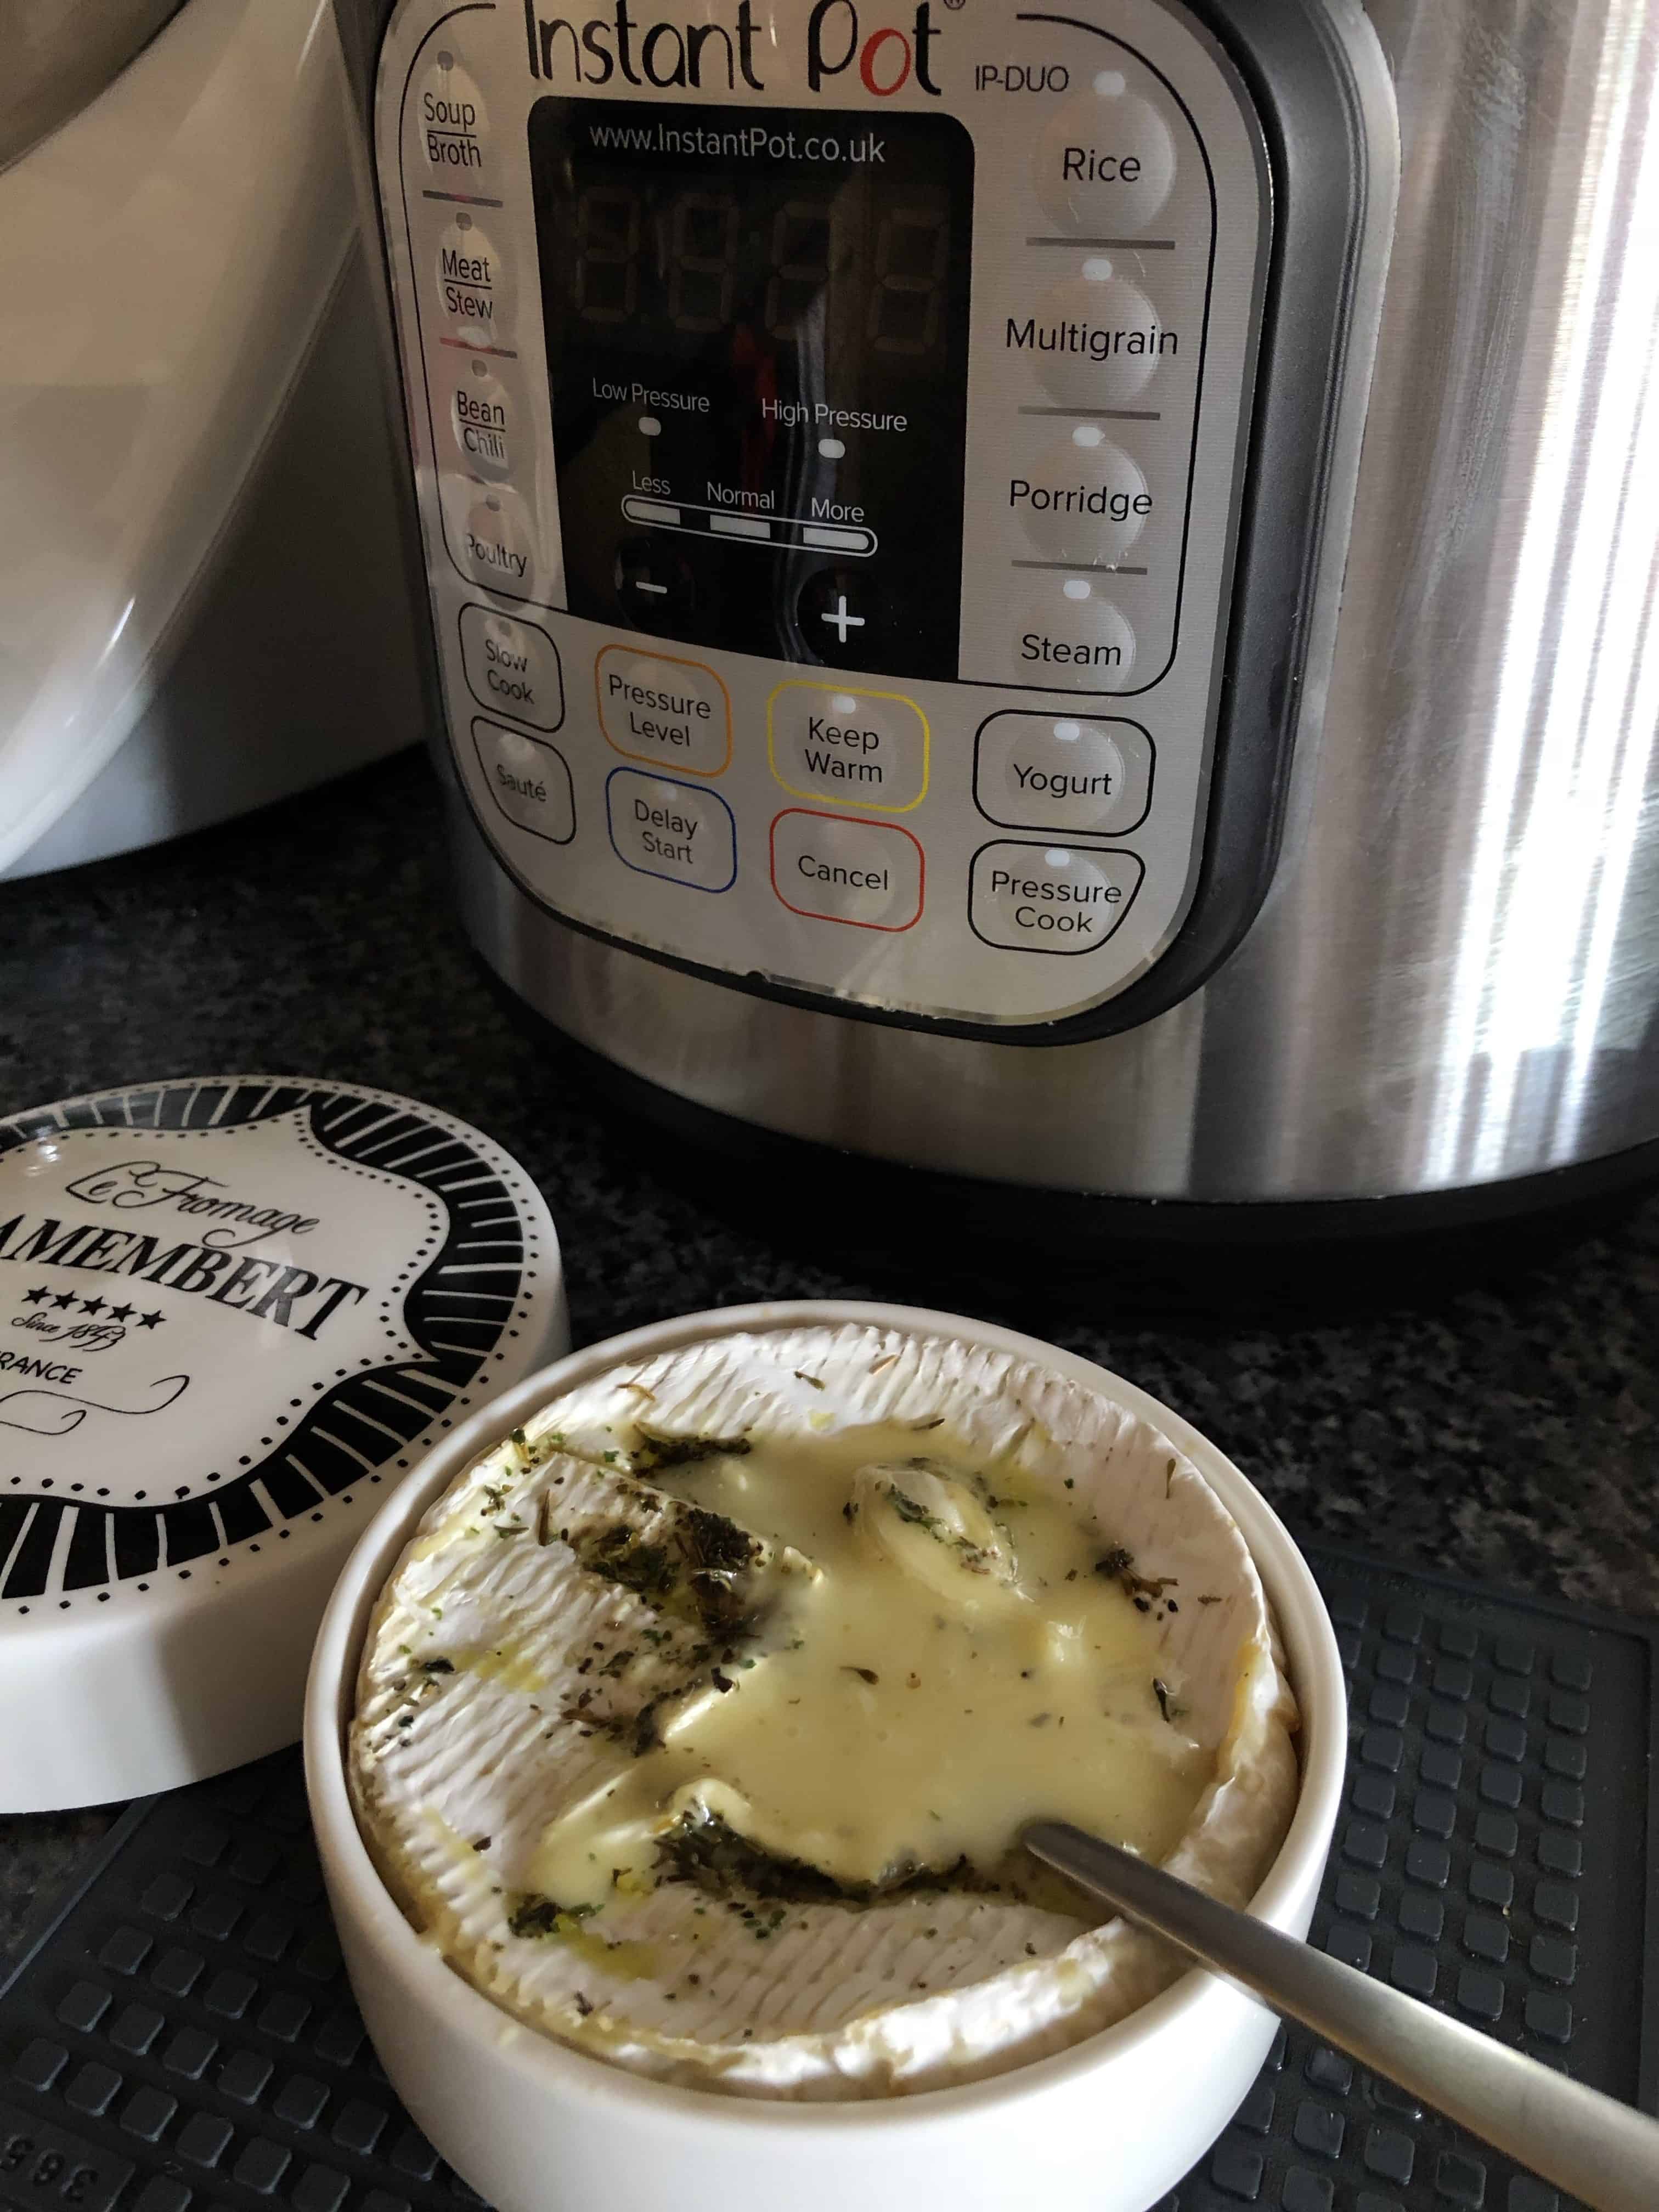 Instant Pot Baked Camembert pressure cooked in a ceramic blue and white Camembert Baker with herbs and garlic with the Instant Pot DUO in the background